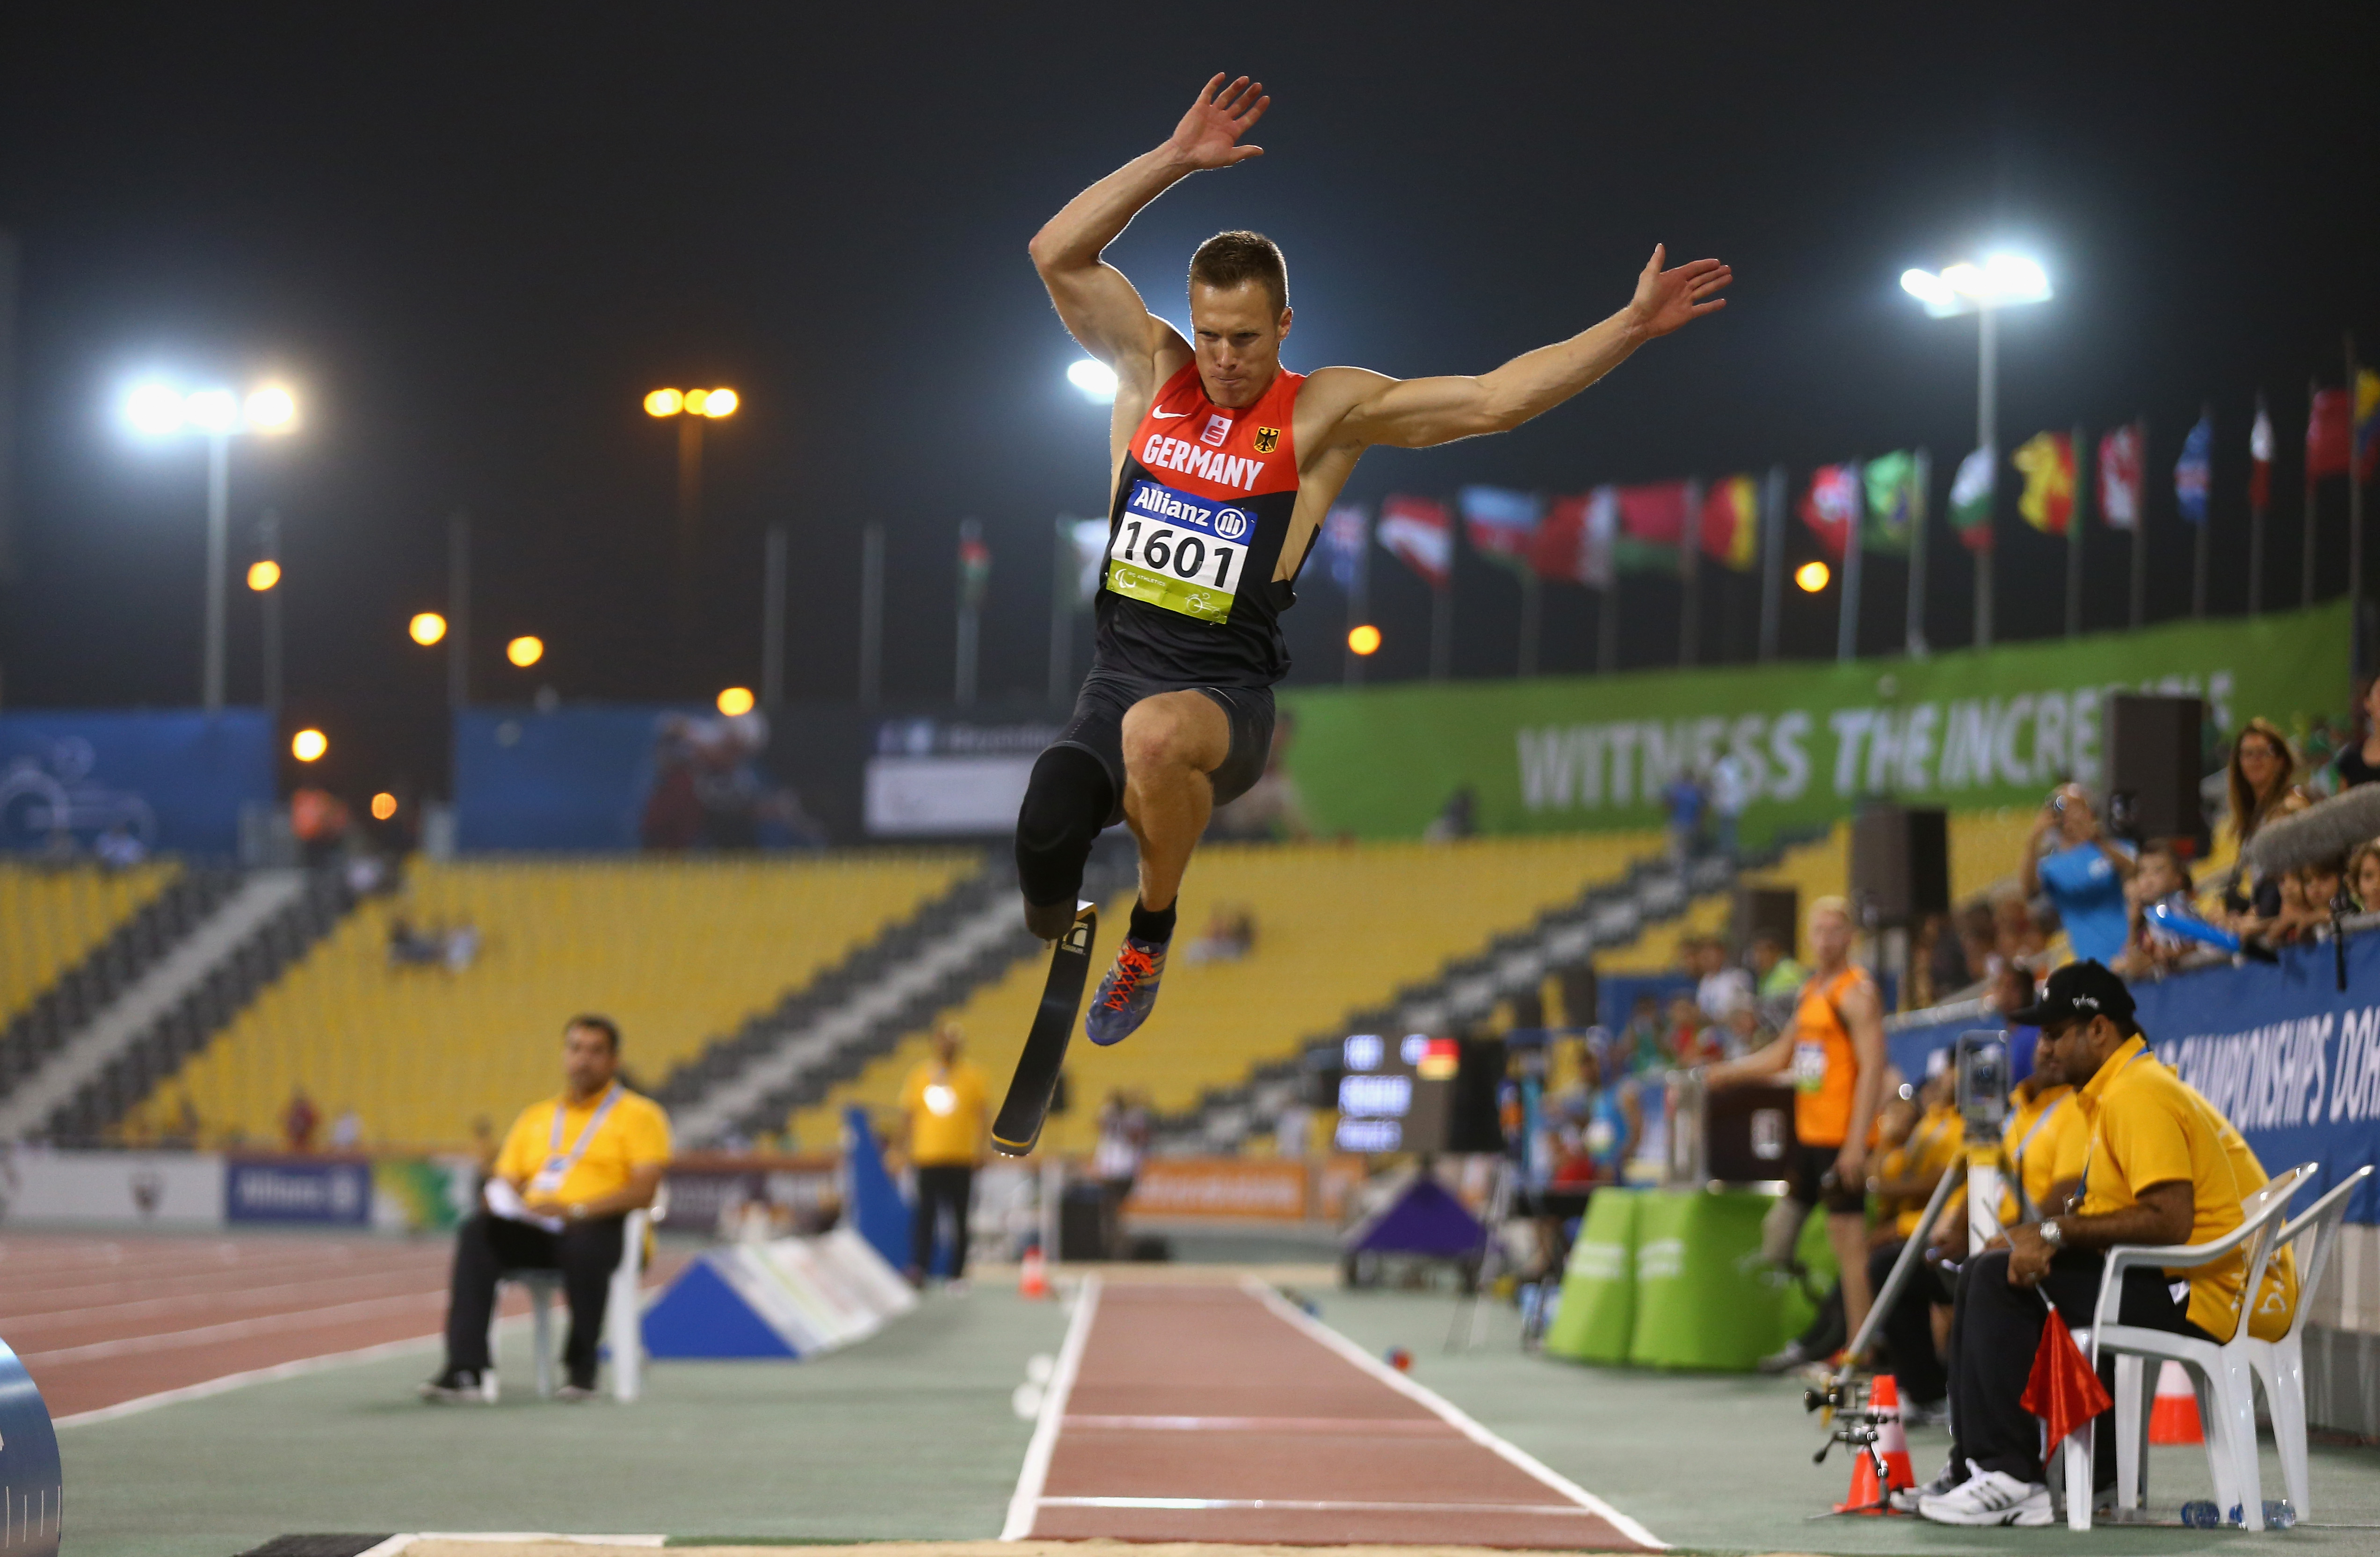 Sport Week Six Potential Storylines In Athletics At Rio 16